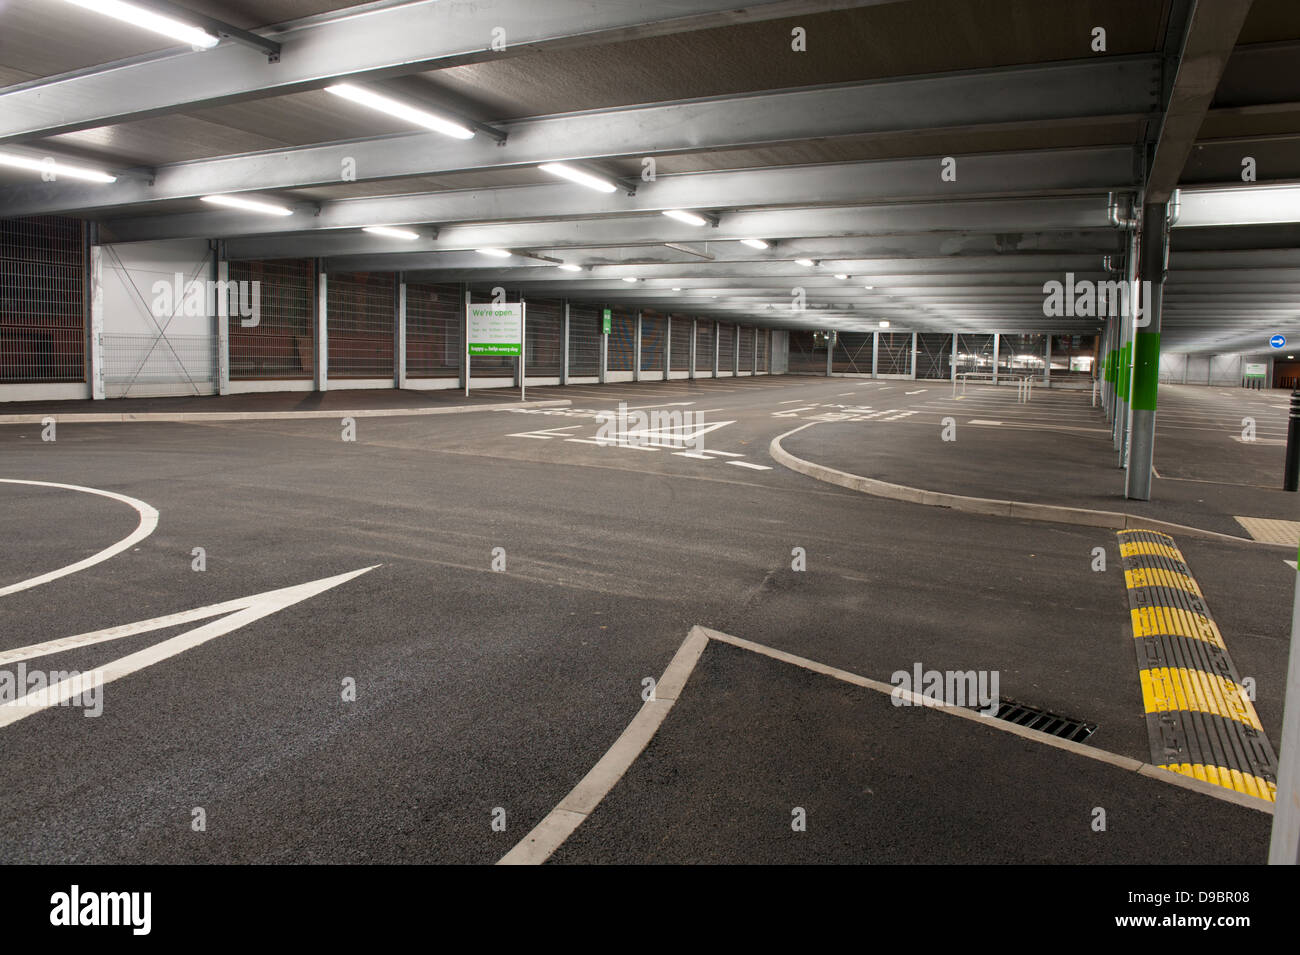 New painted road junction empty car park background Stock Photo